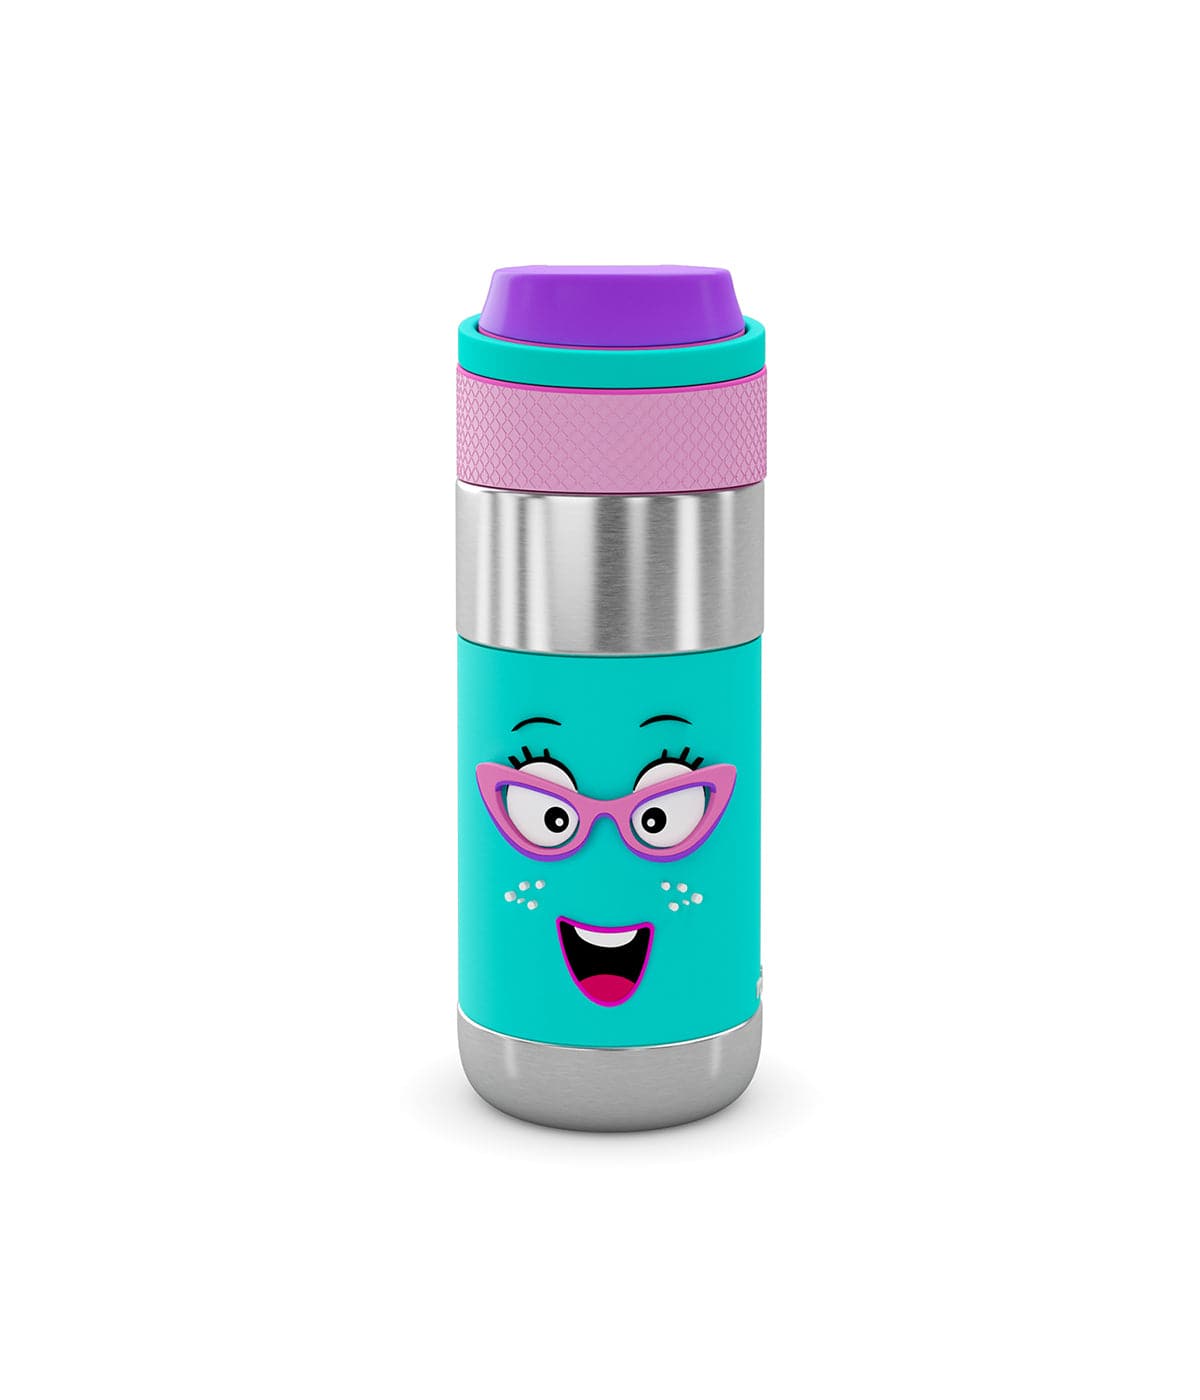 Essential Combo Steel (1 Smash Kids School bag + 1 Better Cup with Training Lid + 1 Clean Lock Insulated Stainless Steel Bottle)